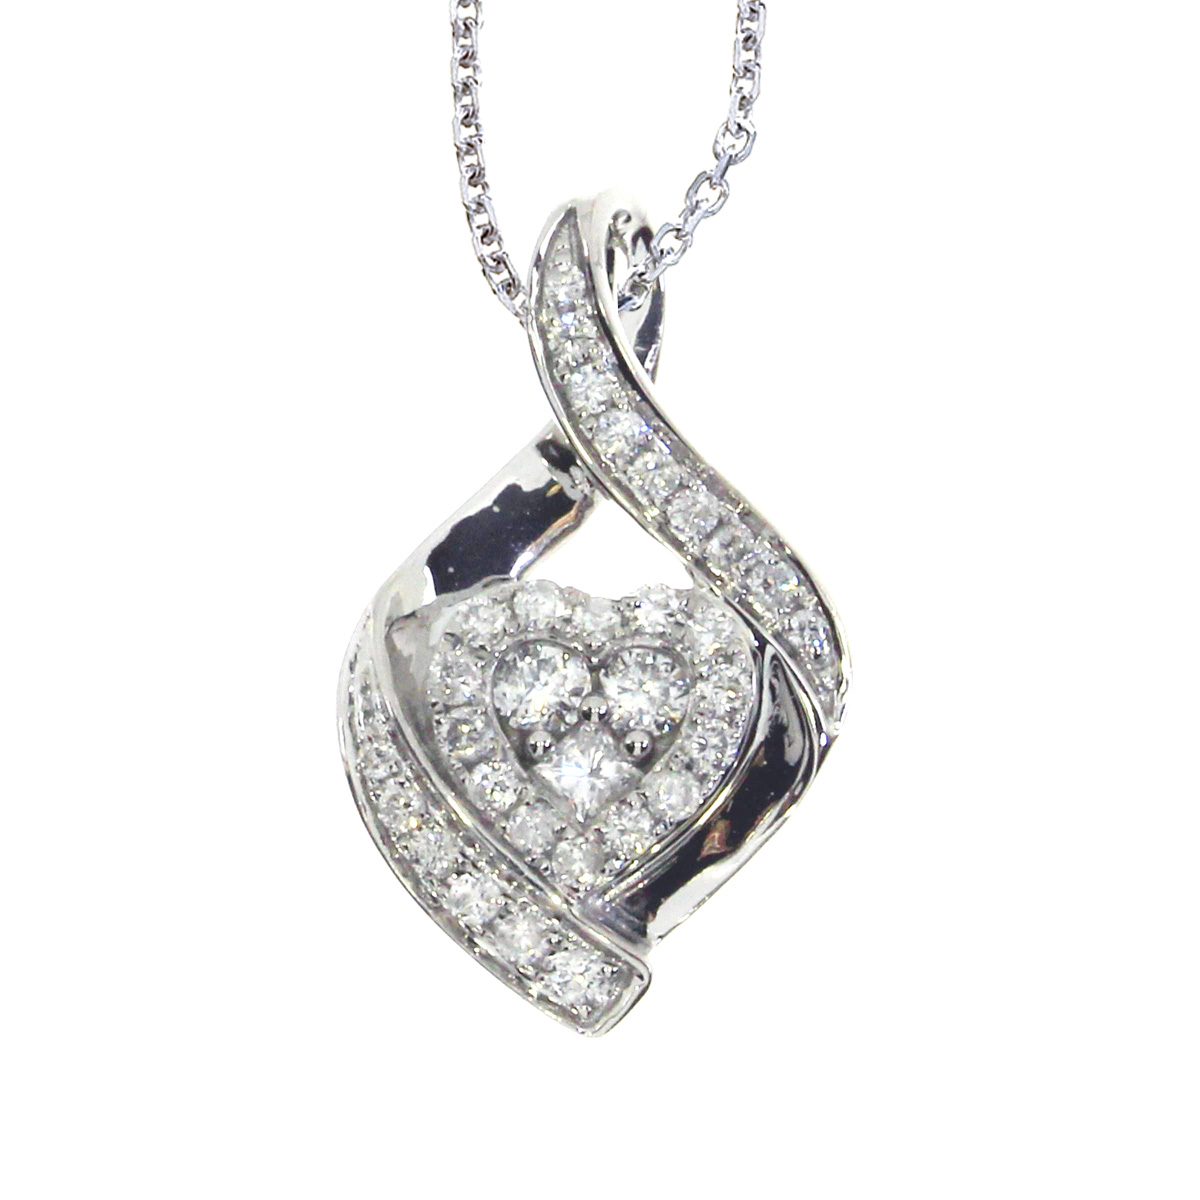 Beautiful shimmering 14k white gold heart shaped pendant covered in .37 carats of genuine bright diamonds.